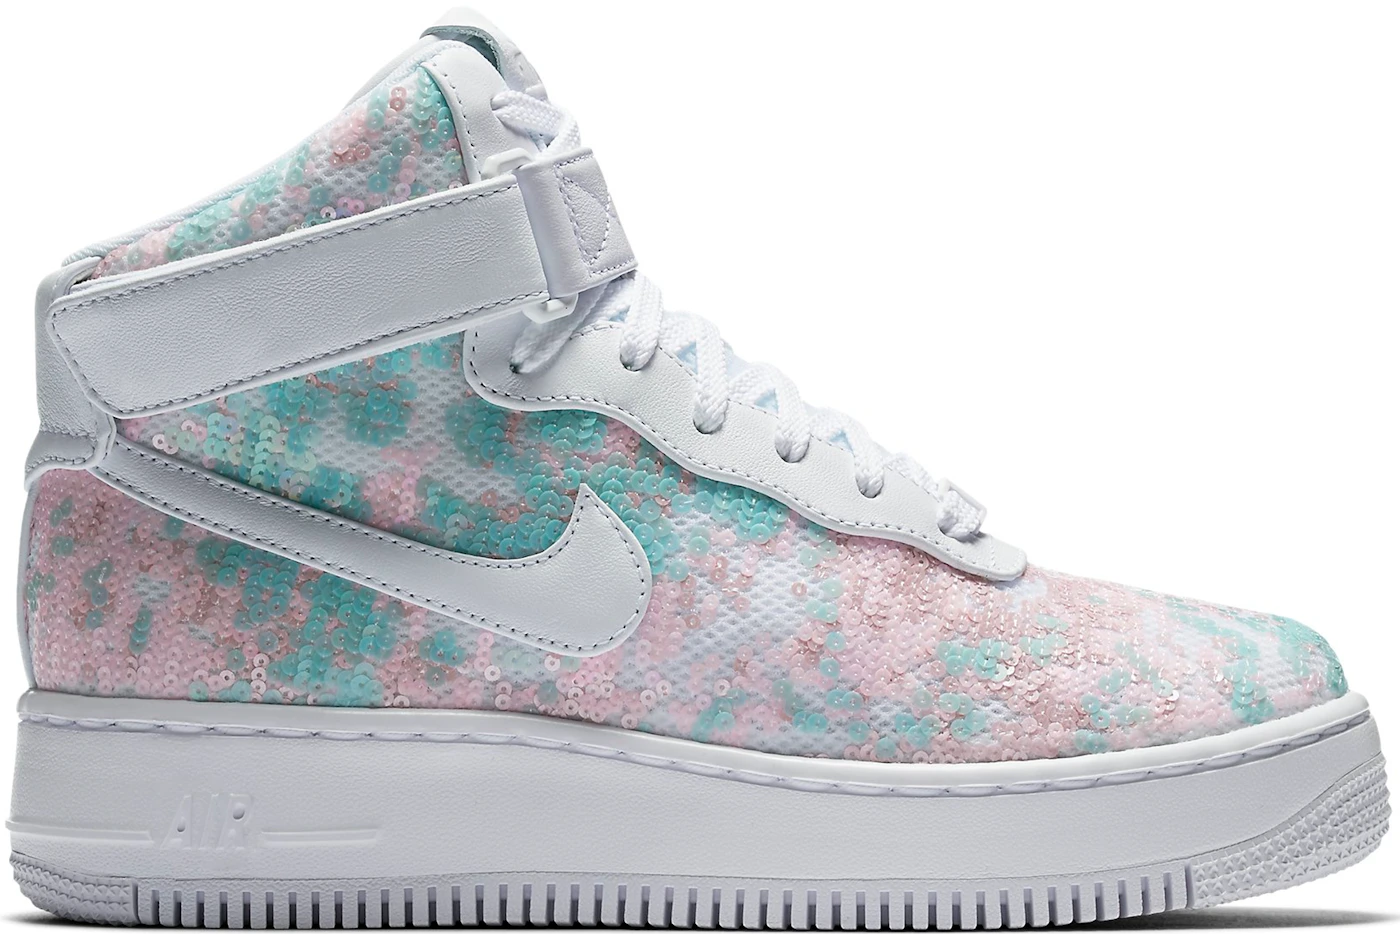 Nike Women's Air Force 1 '07 ESS Trend Shoes (DV7470-100)  Expeditedship